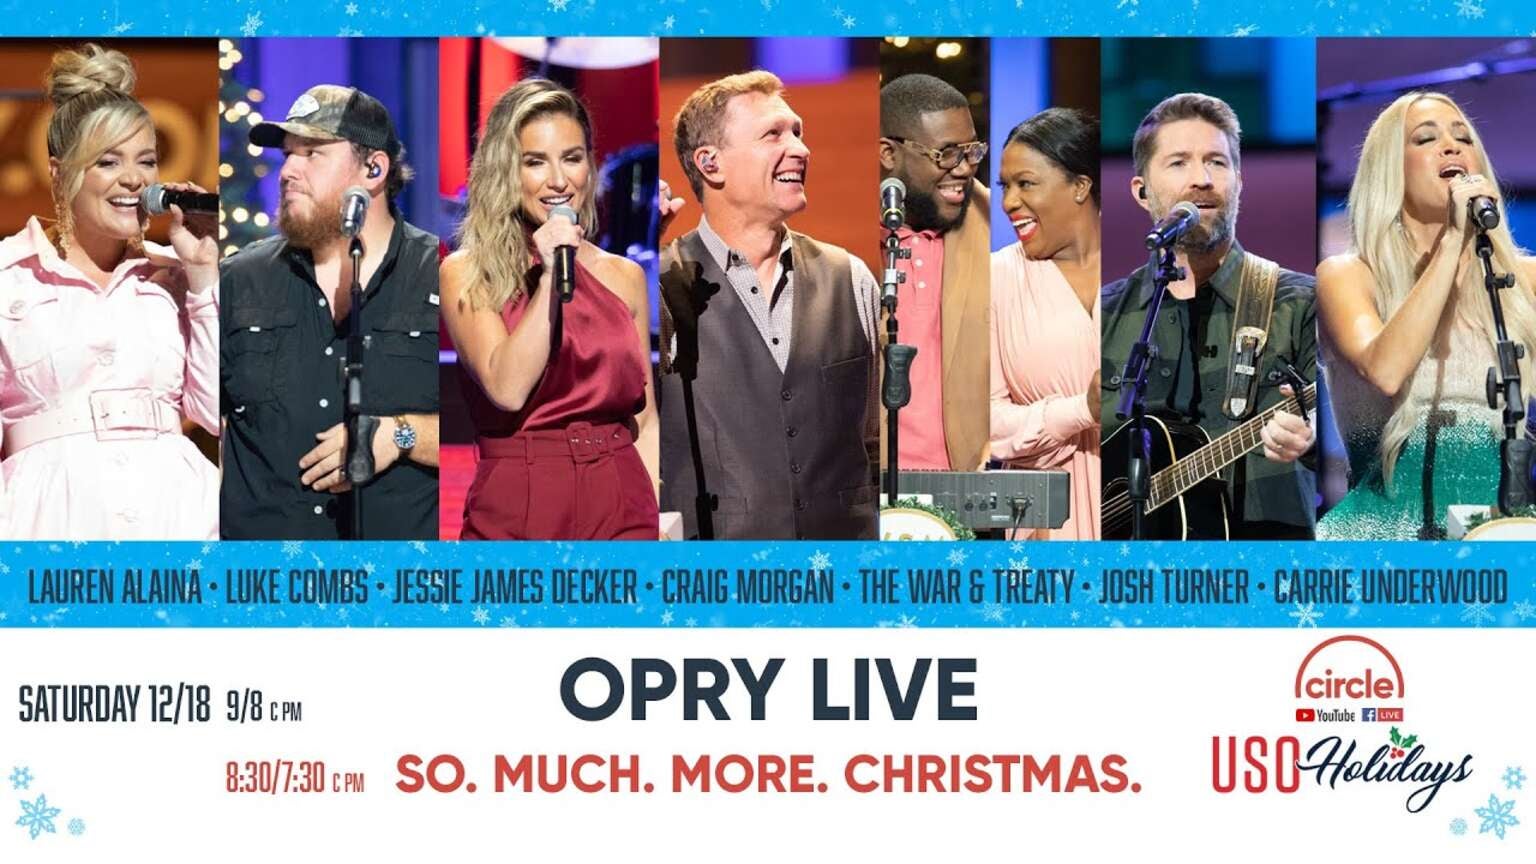 How to Watch 'Opry Live USO Holiday Special' Live for Free on Apple TV